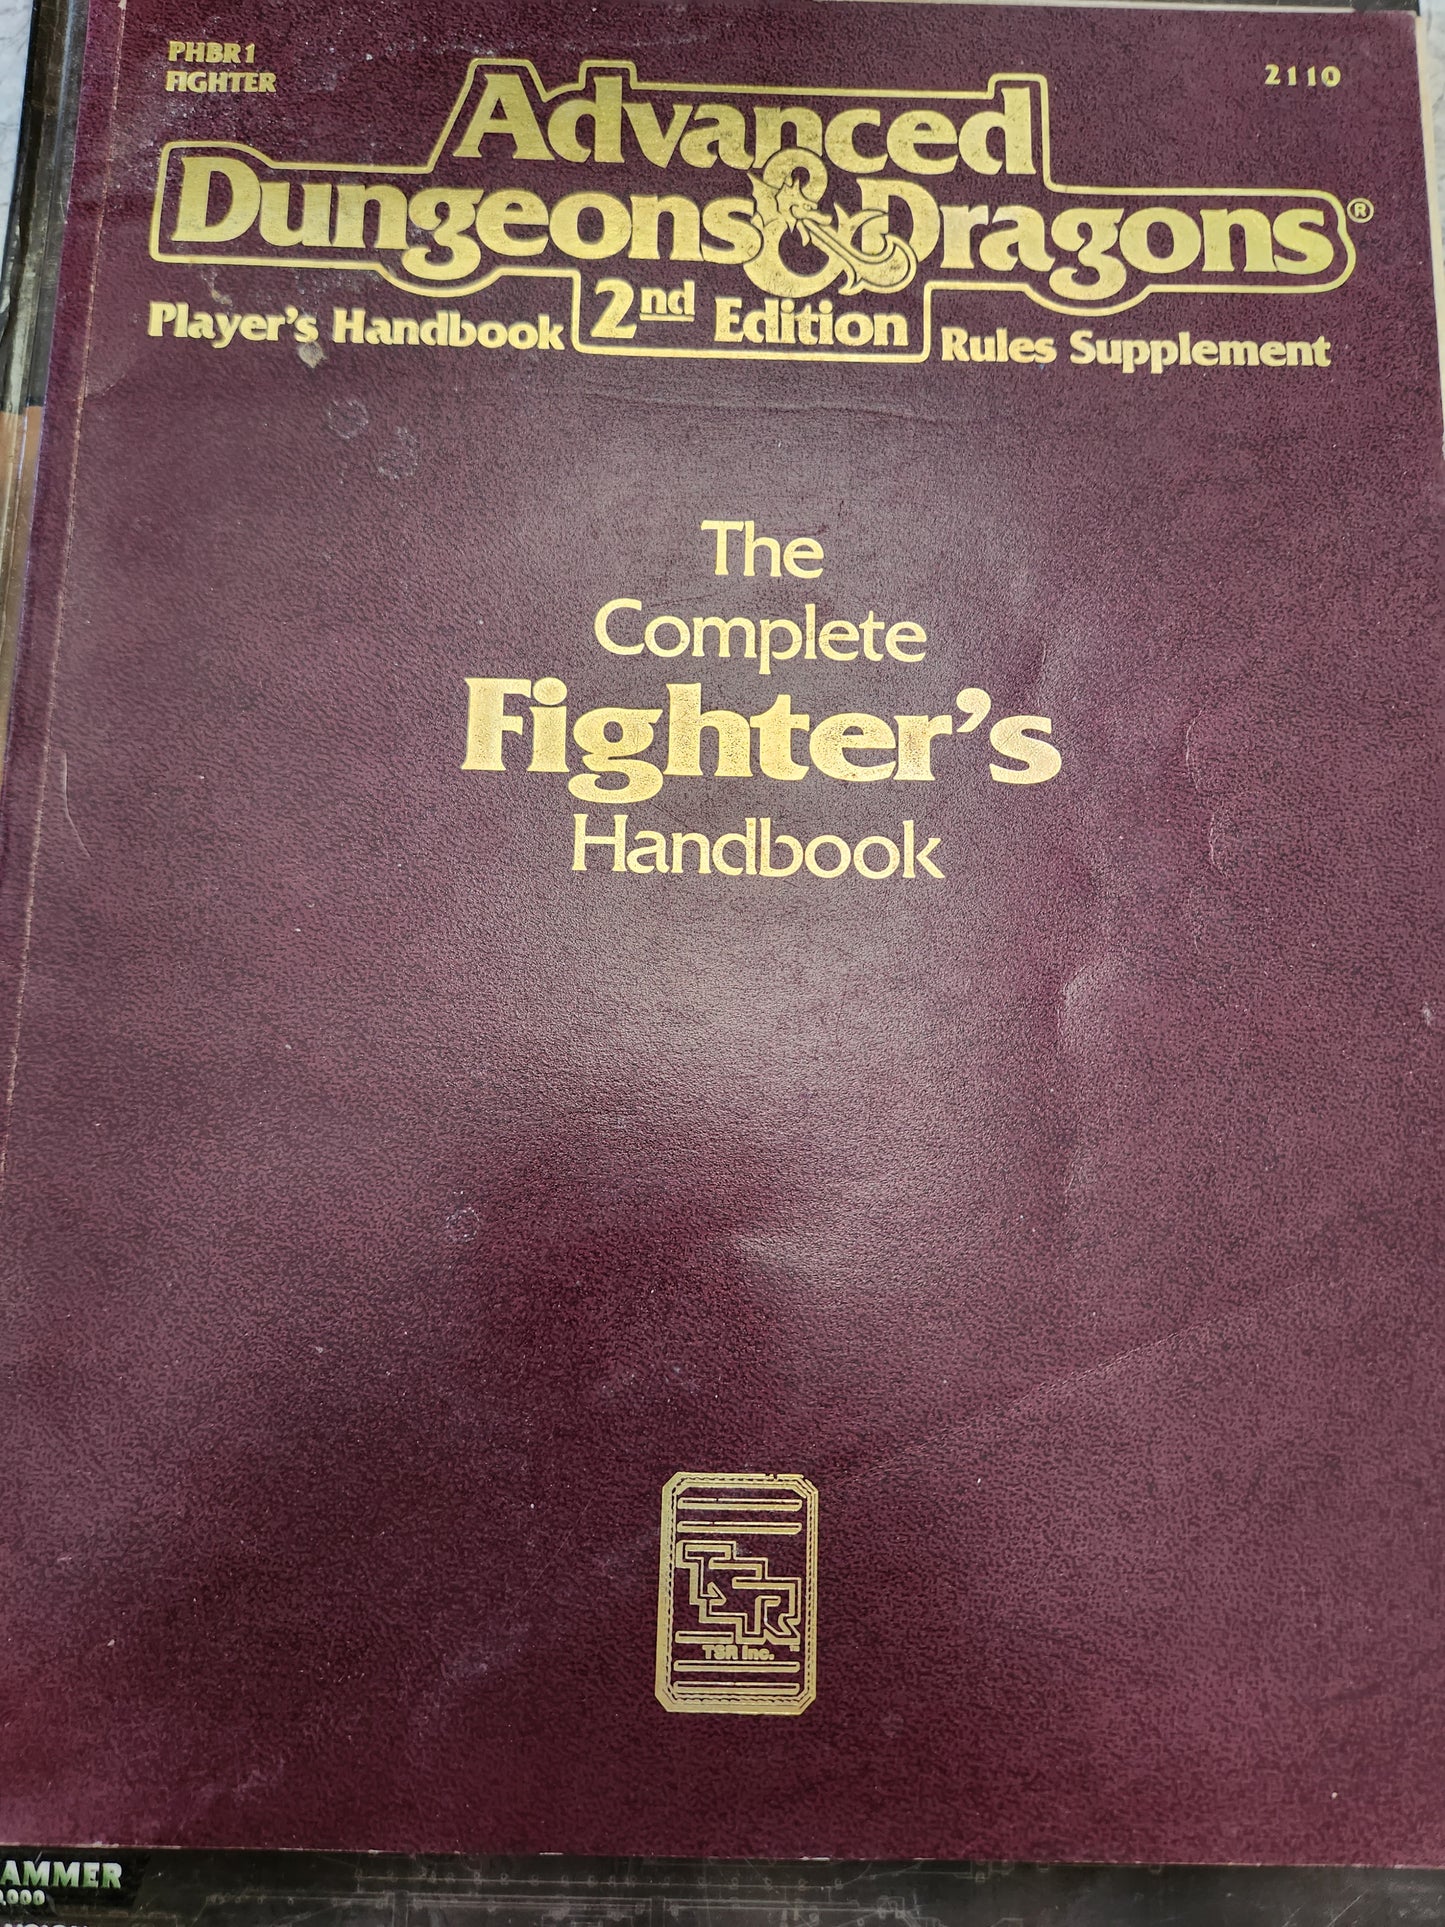 PHBR1 THE COMPLETE FIGHTER'S HANDBOOK 1991 2nd print AD&D 2nd Edition